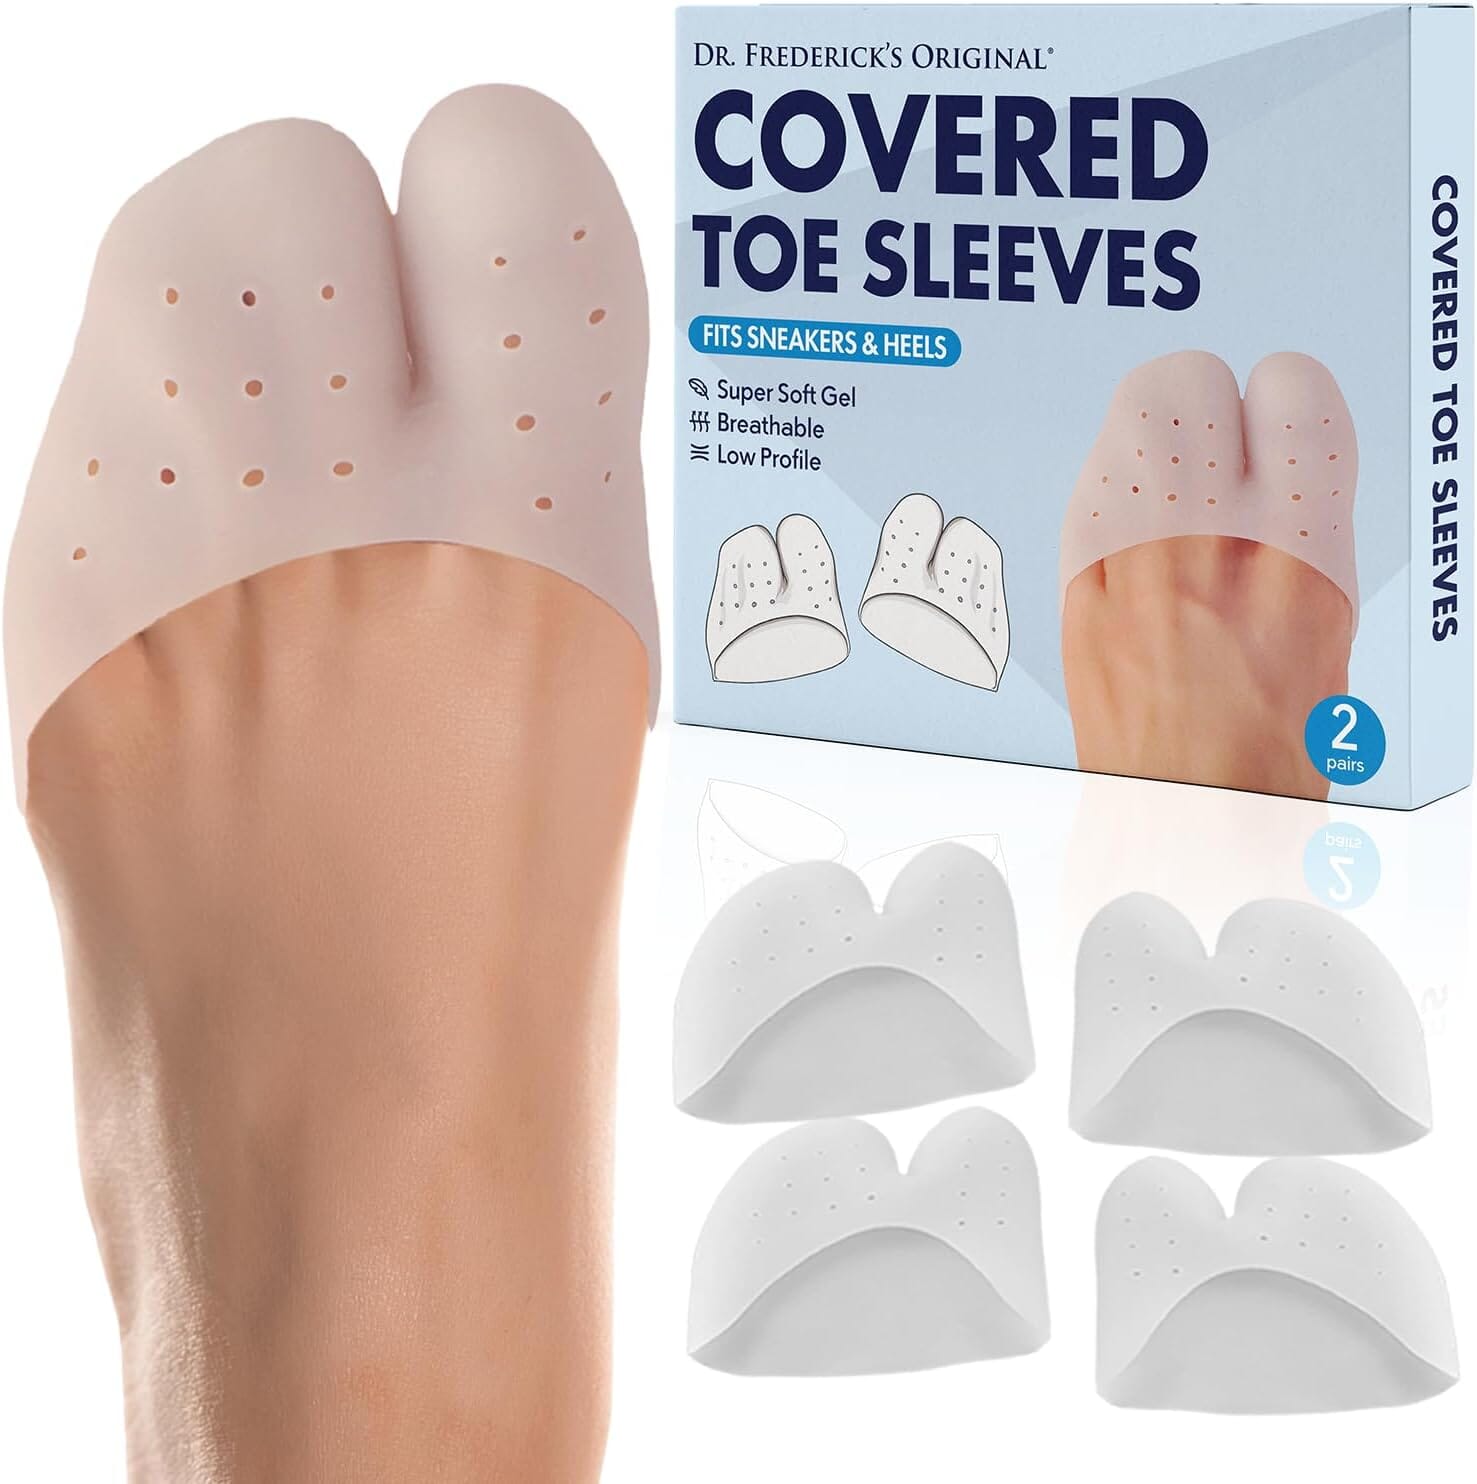 Dr. Frederick's Original All-Day Comfort Toe Sleeves - 4 Pieces - Breathable Gel Toe Protectors with Metatarsal Pads - Versatile Gel Toe Caps for Men & Women Foot Pain Dr. Frederick's Original 